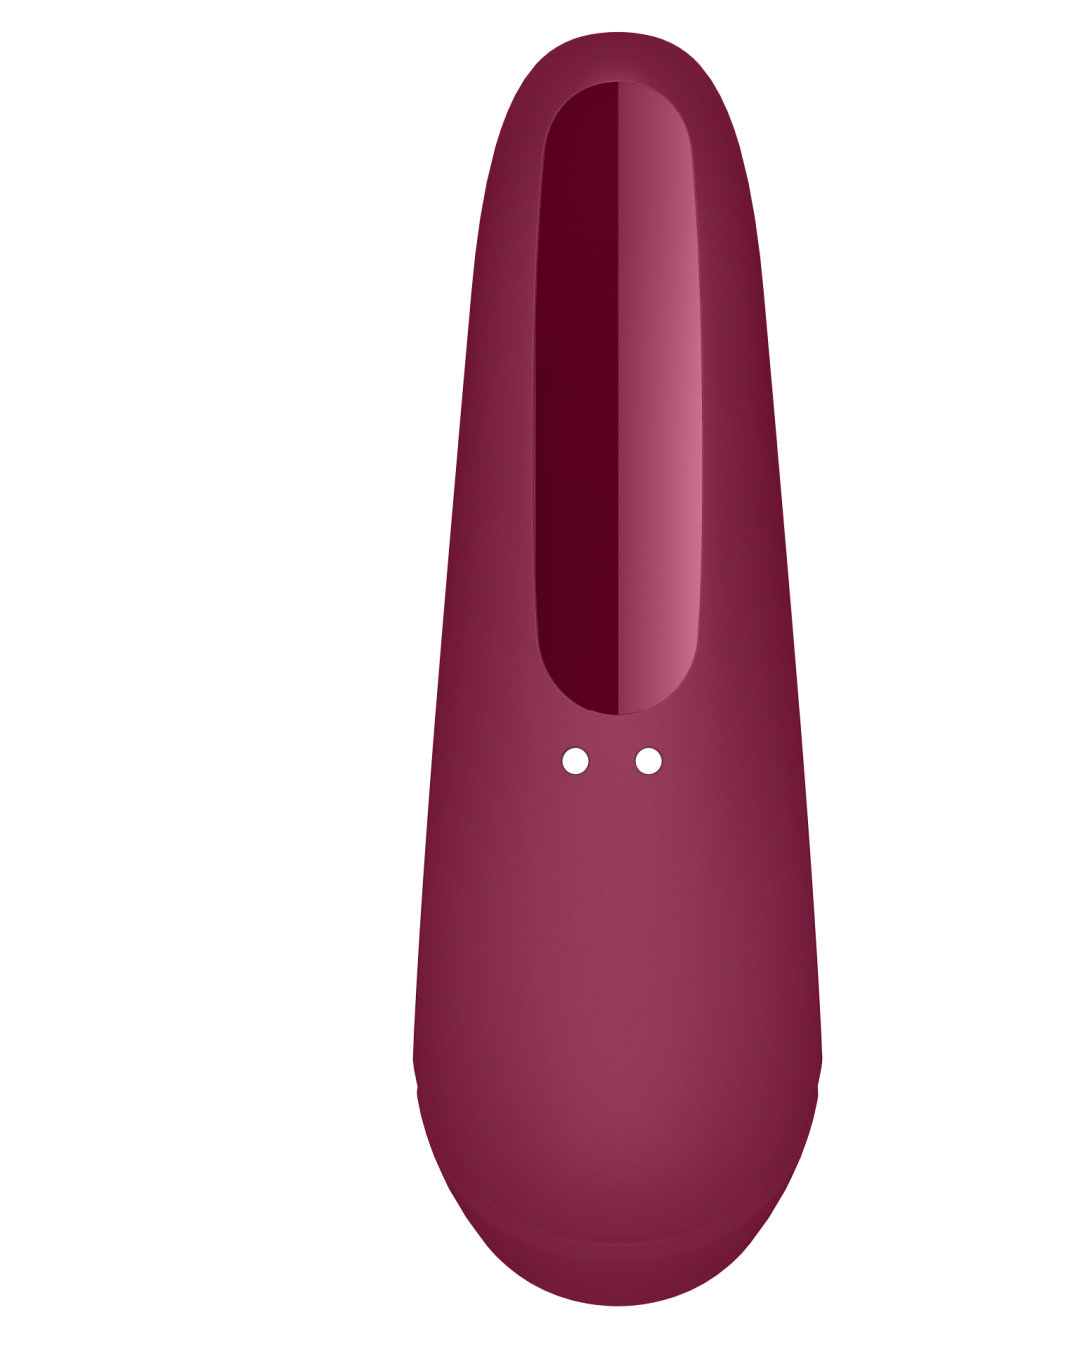 Satisfyer Curvy 1+ Pressure Wave + Vibration Stimulator - Dark Red showing the back of the unit and magnetic chargers